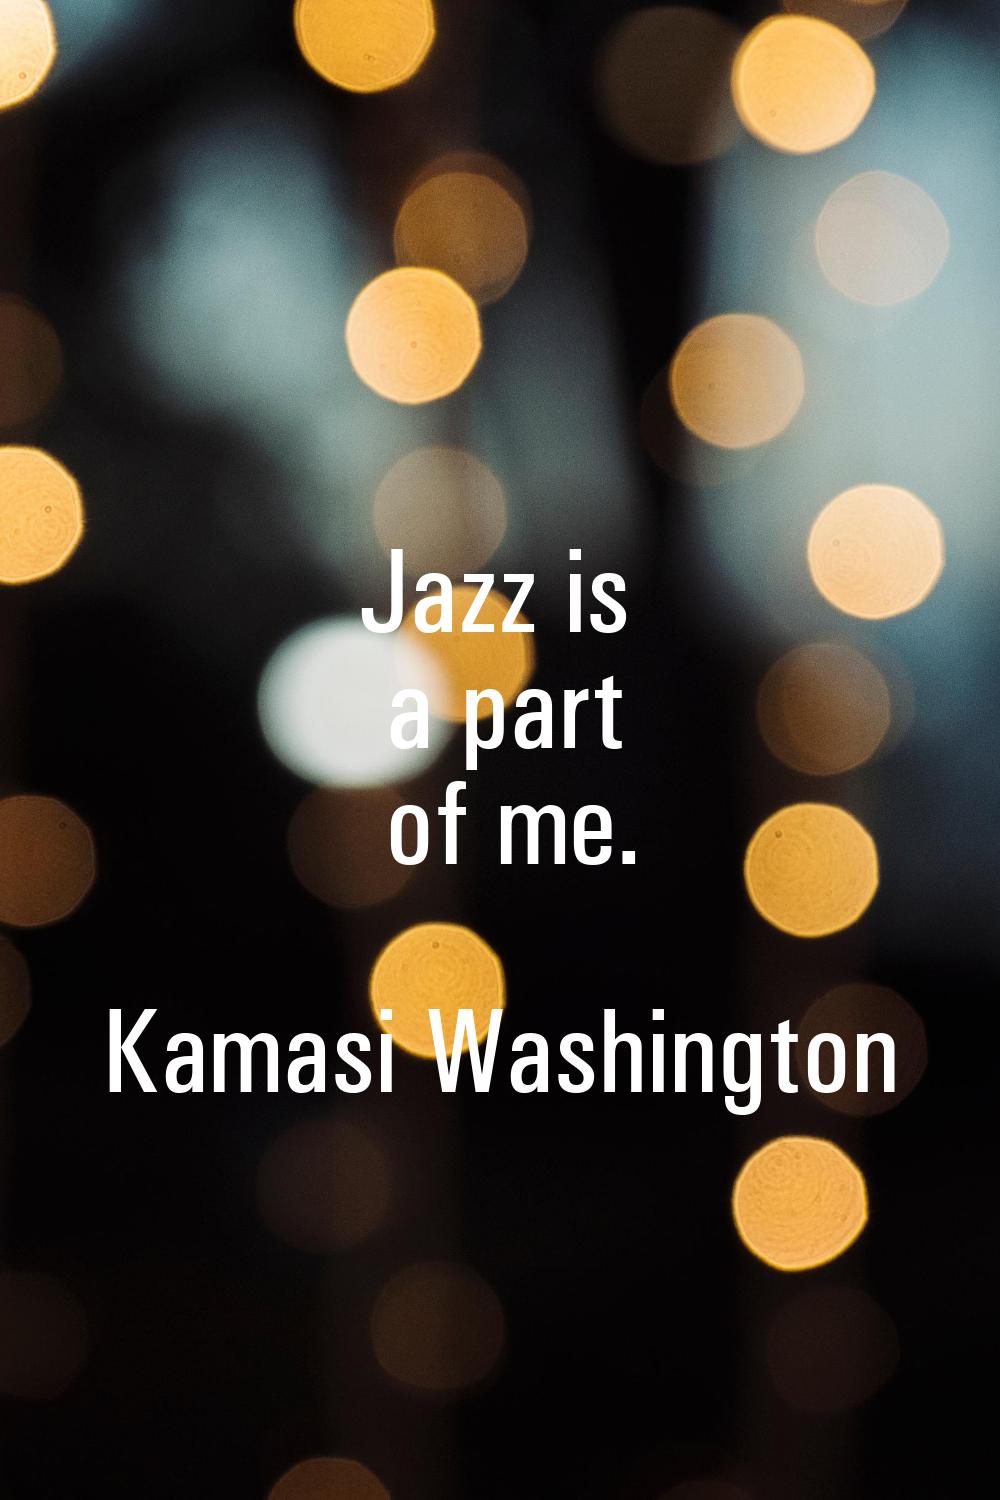 Jazz is a part of me.